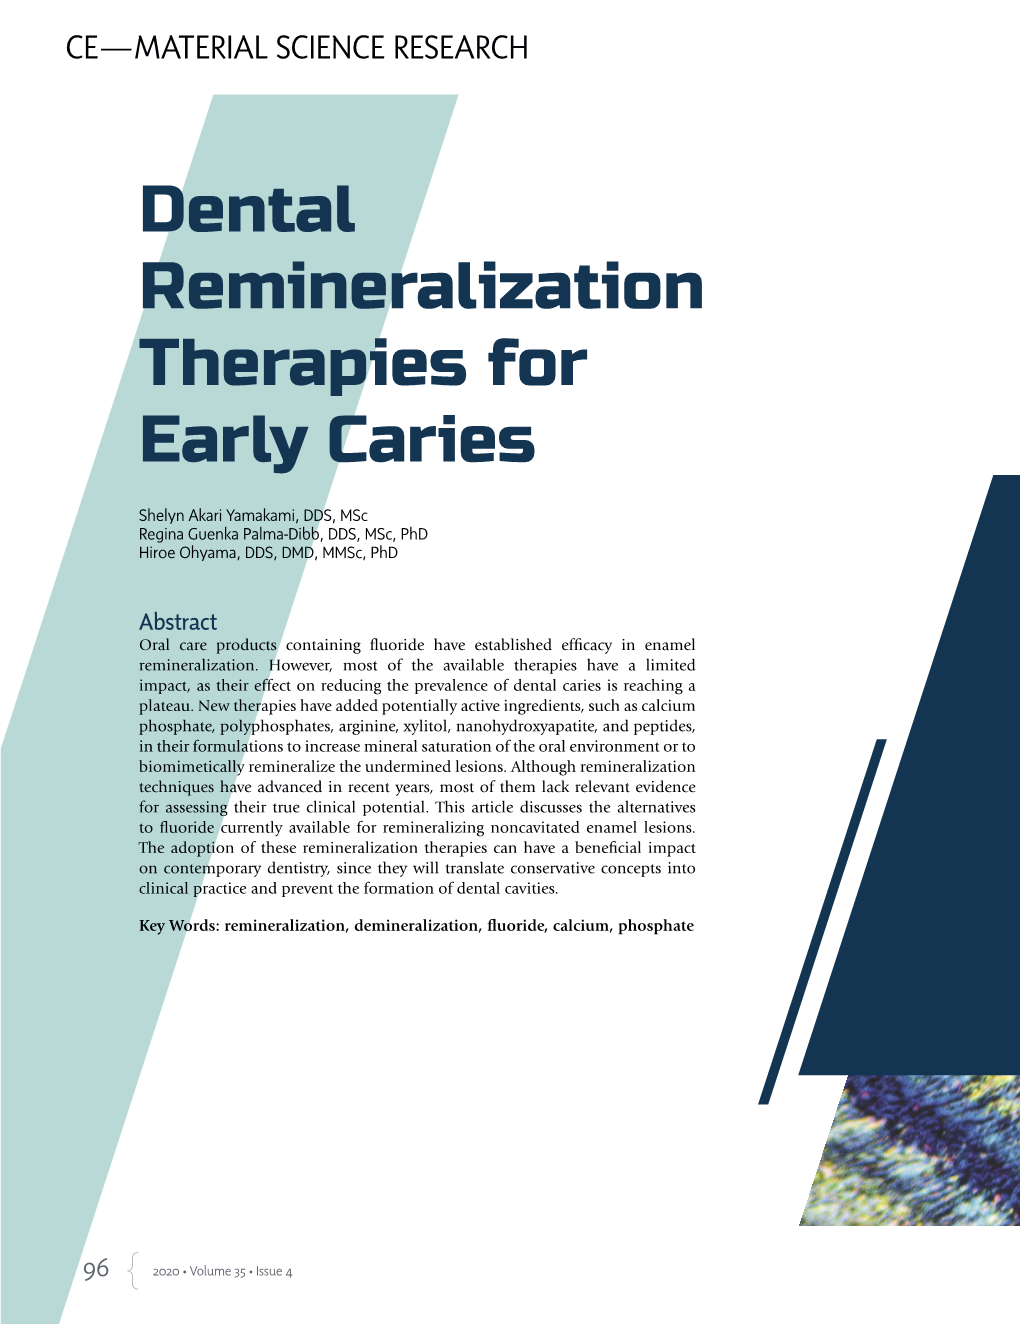 Dental Remineralization Therapies for Early Caries